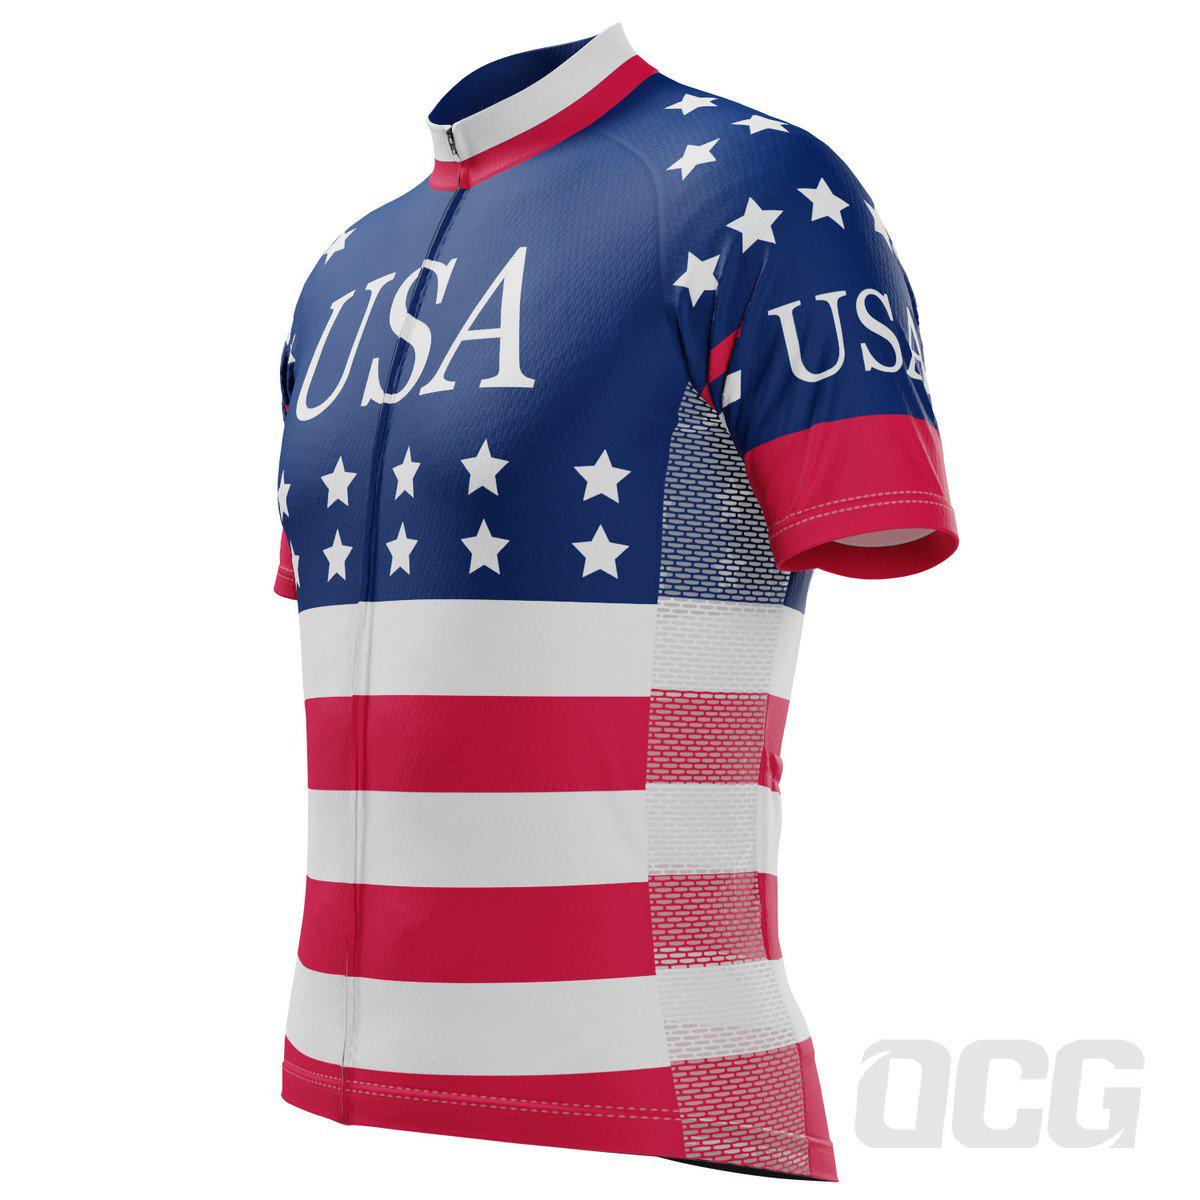 Men's American Stars and Stripes Short Sleeve Cycling Jersey only ...